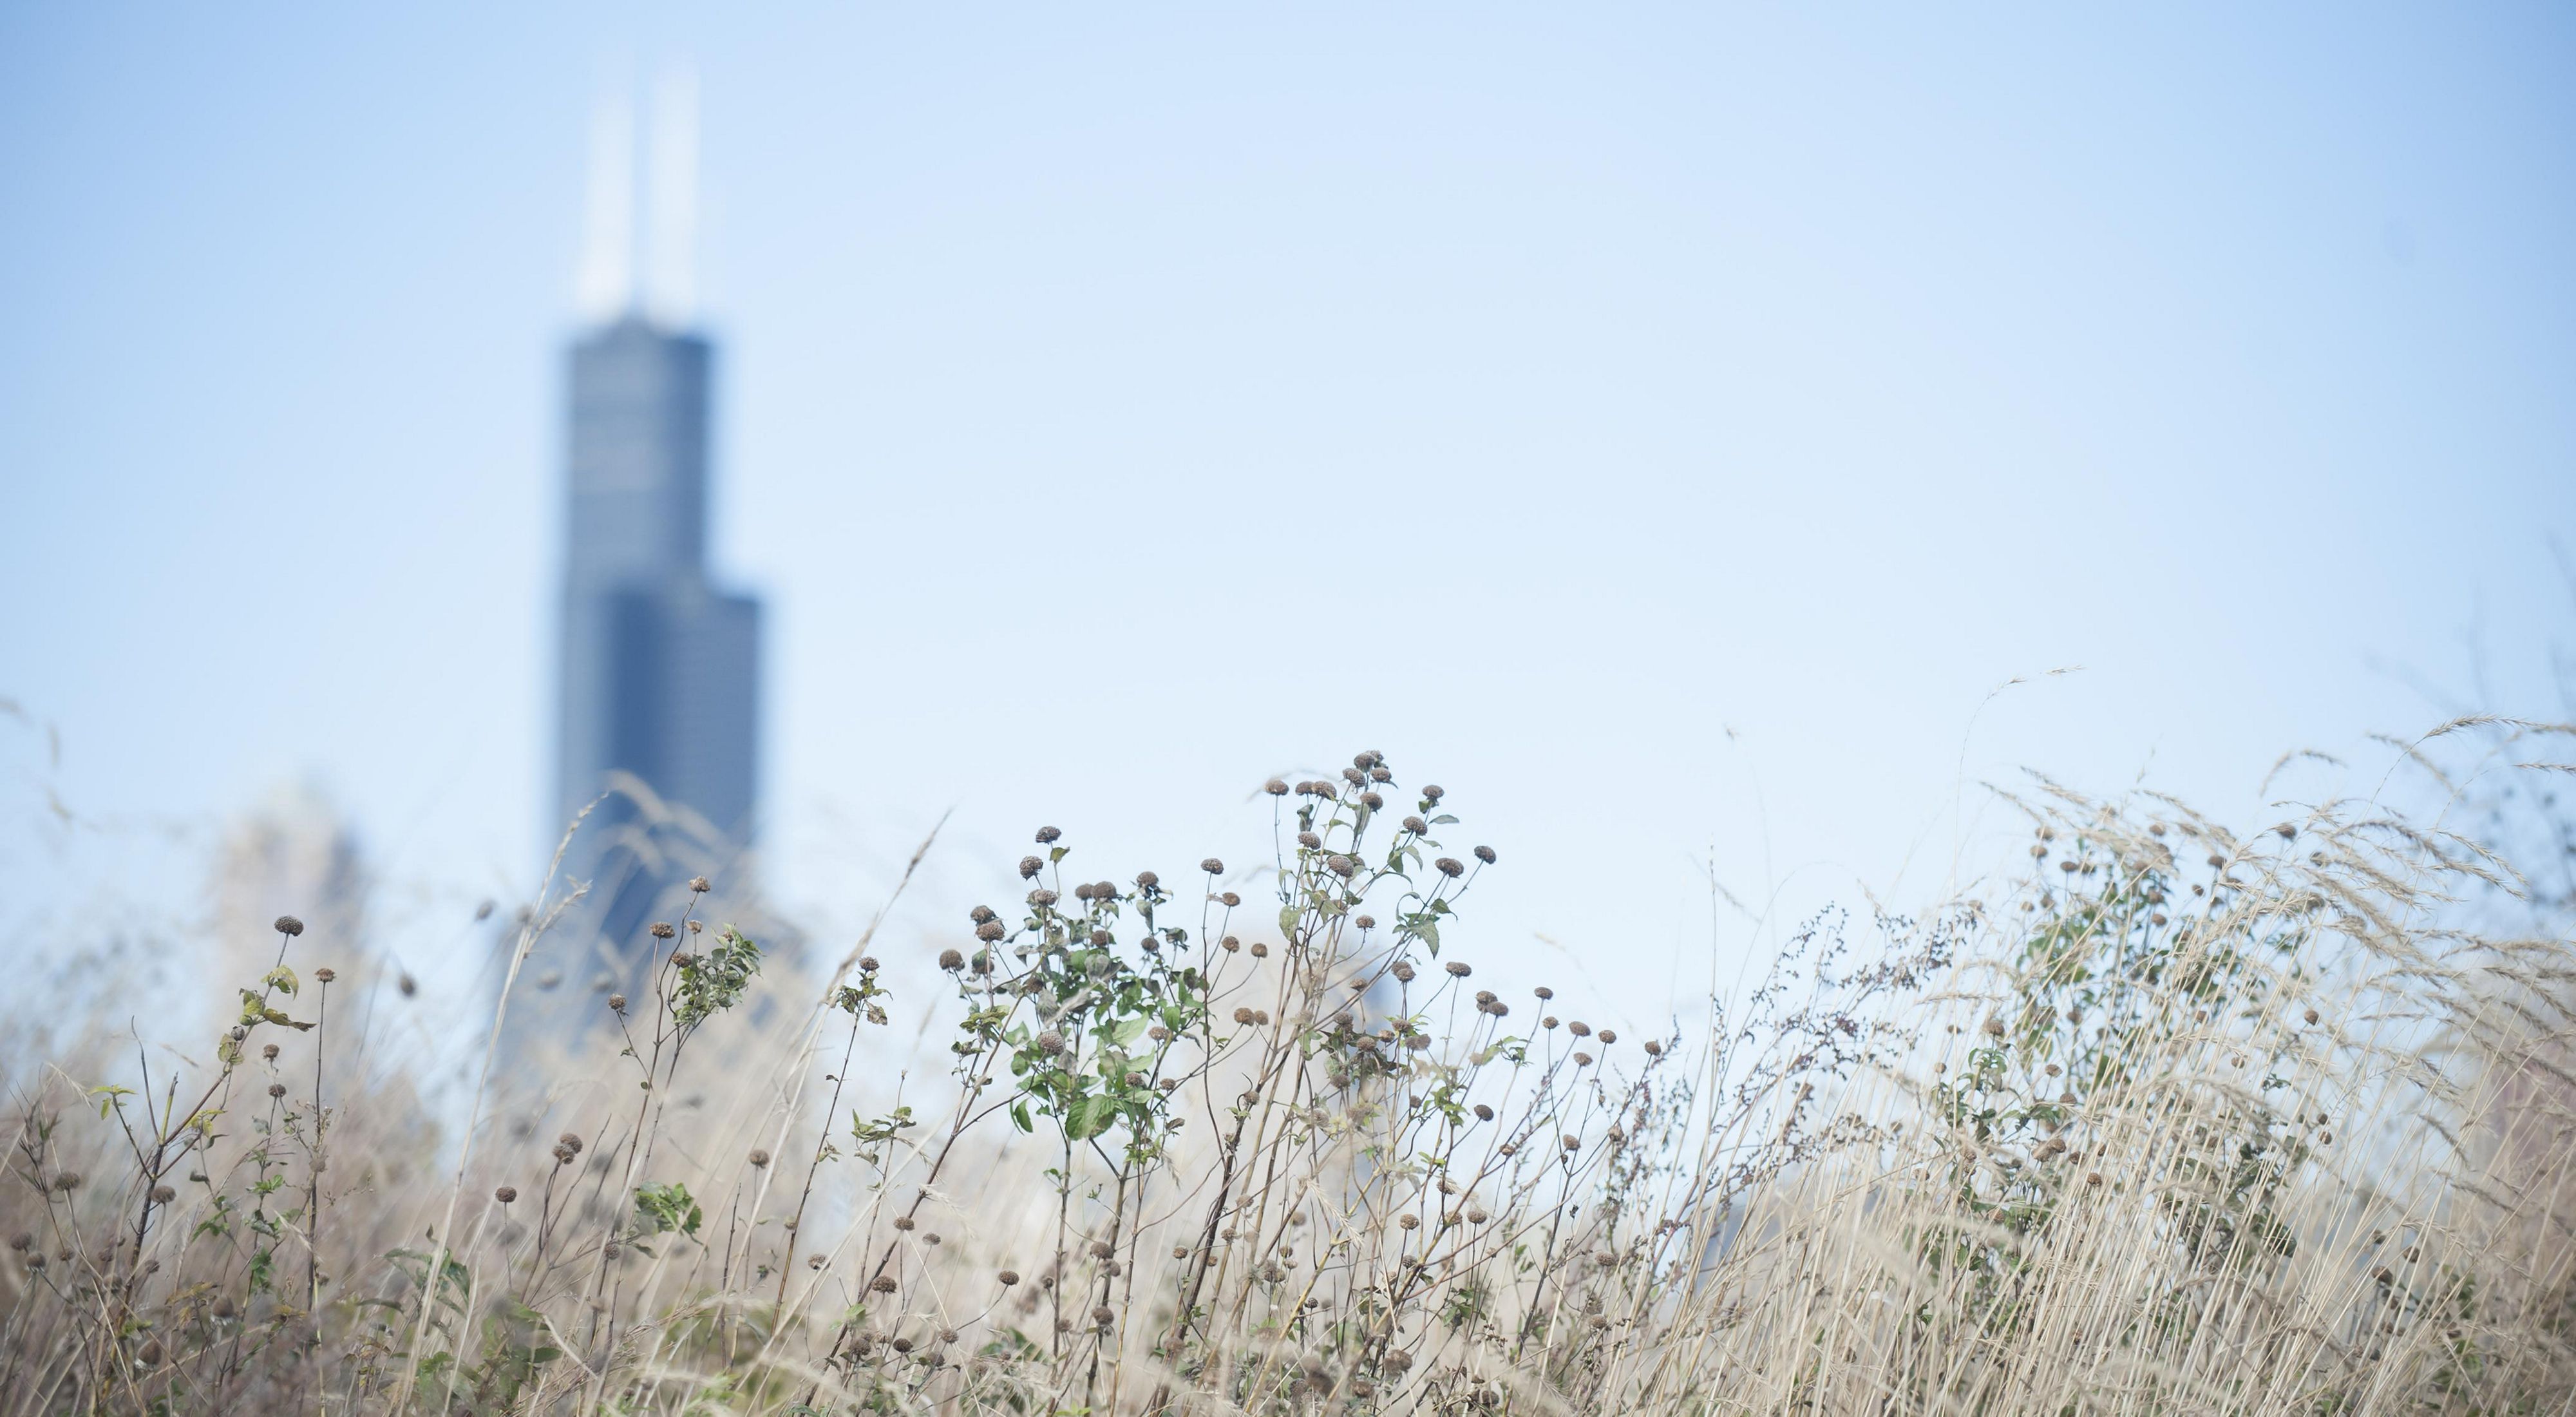 Dry grasses waive in the breeze with Willis Tower in the background.